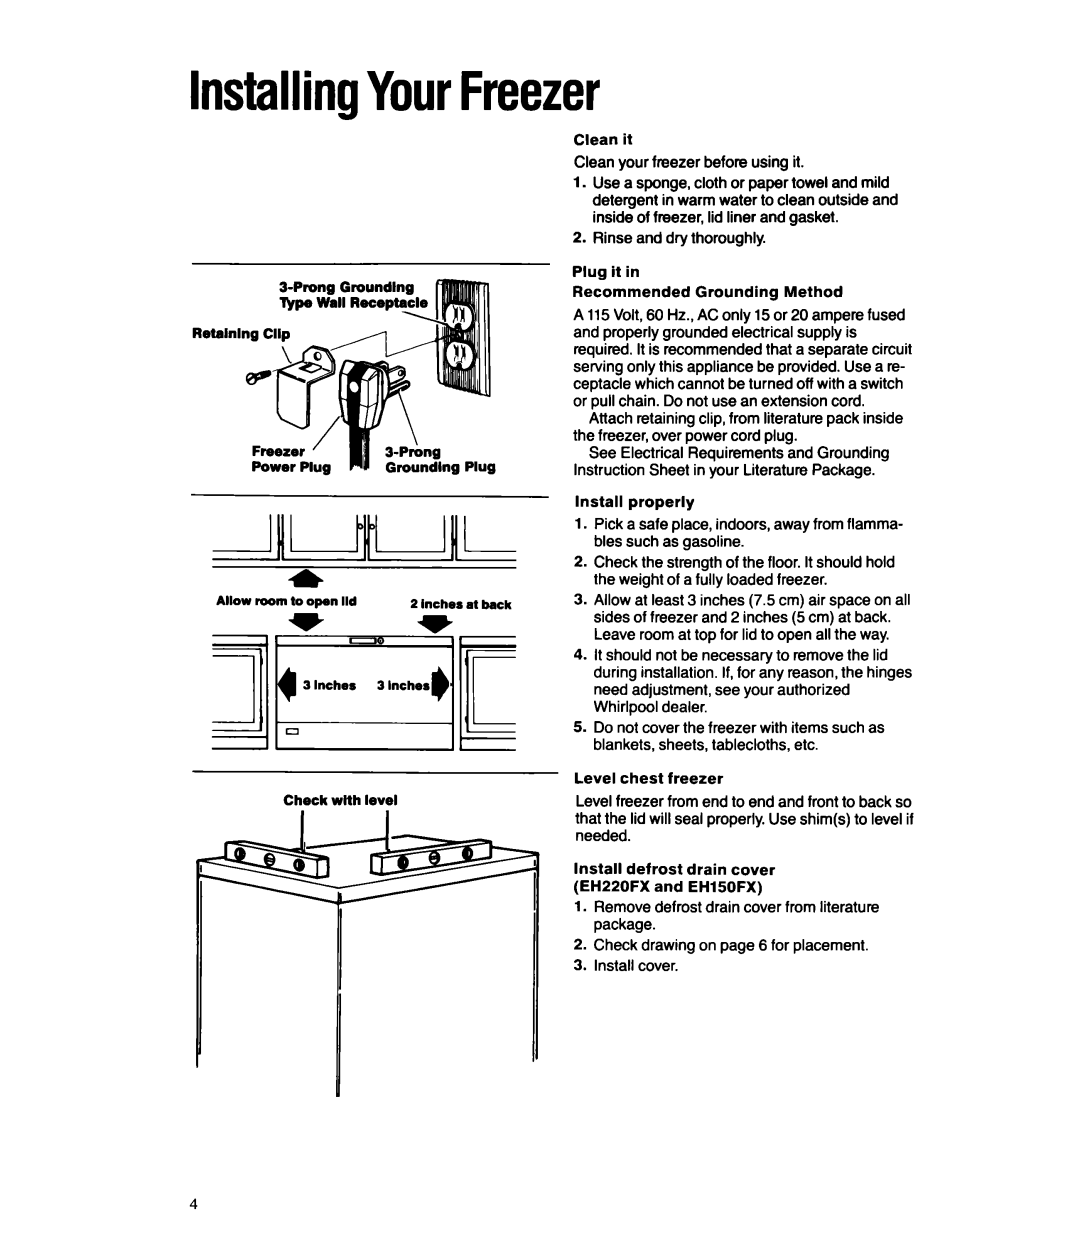 Whirlpool EH050FX, EH220FX, EHl50FX InstallingYourFreezer, Clean your freezer before using it, Rinse and dry thoroughly 